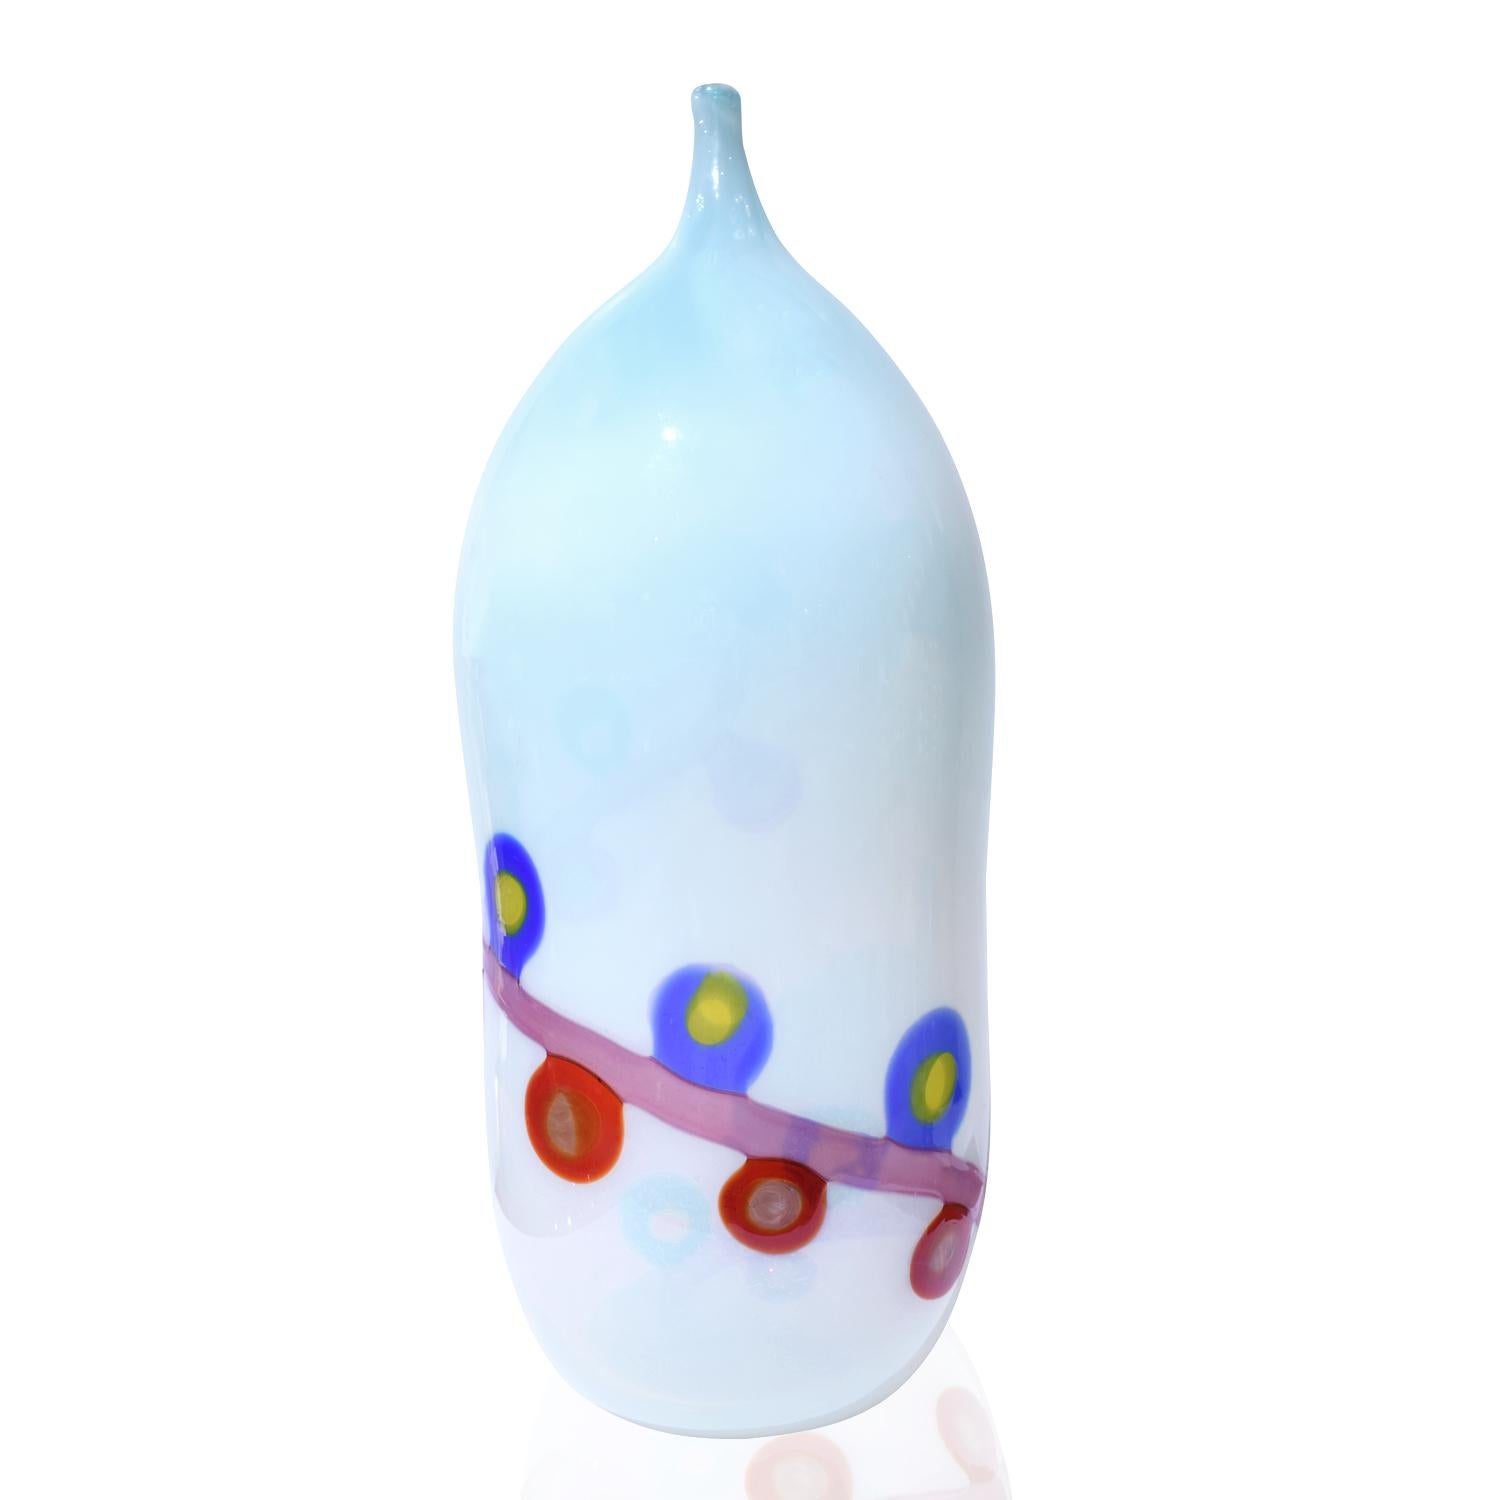 Mid-Century Modern Anzolo Fuga Large Hand Blown Glass Bottle with Colorful Murrhines, 1959-1960